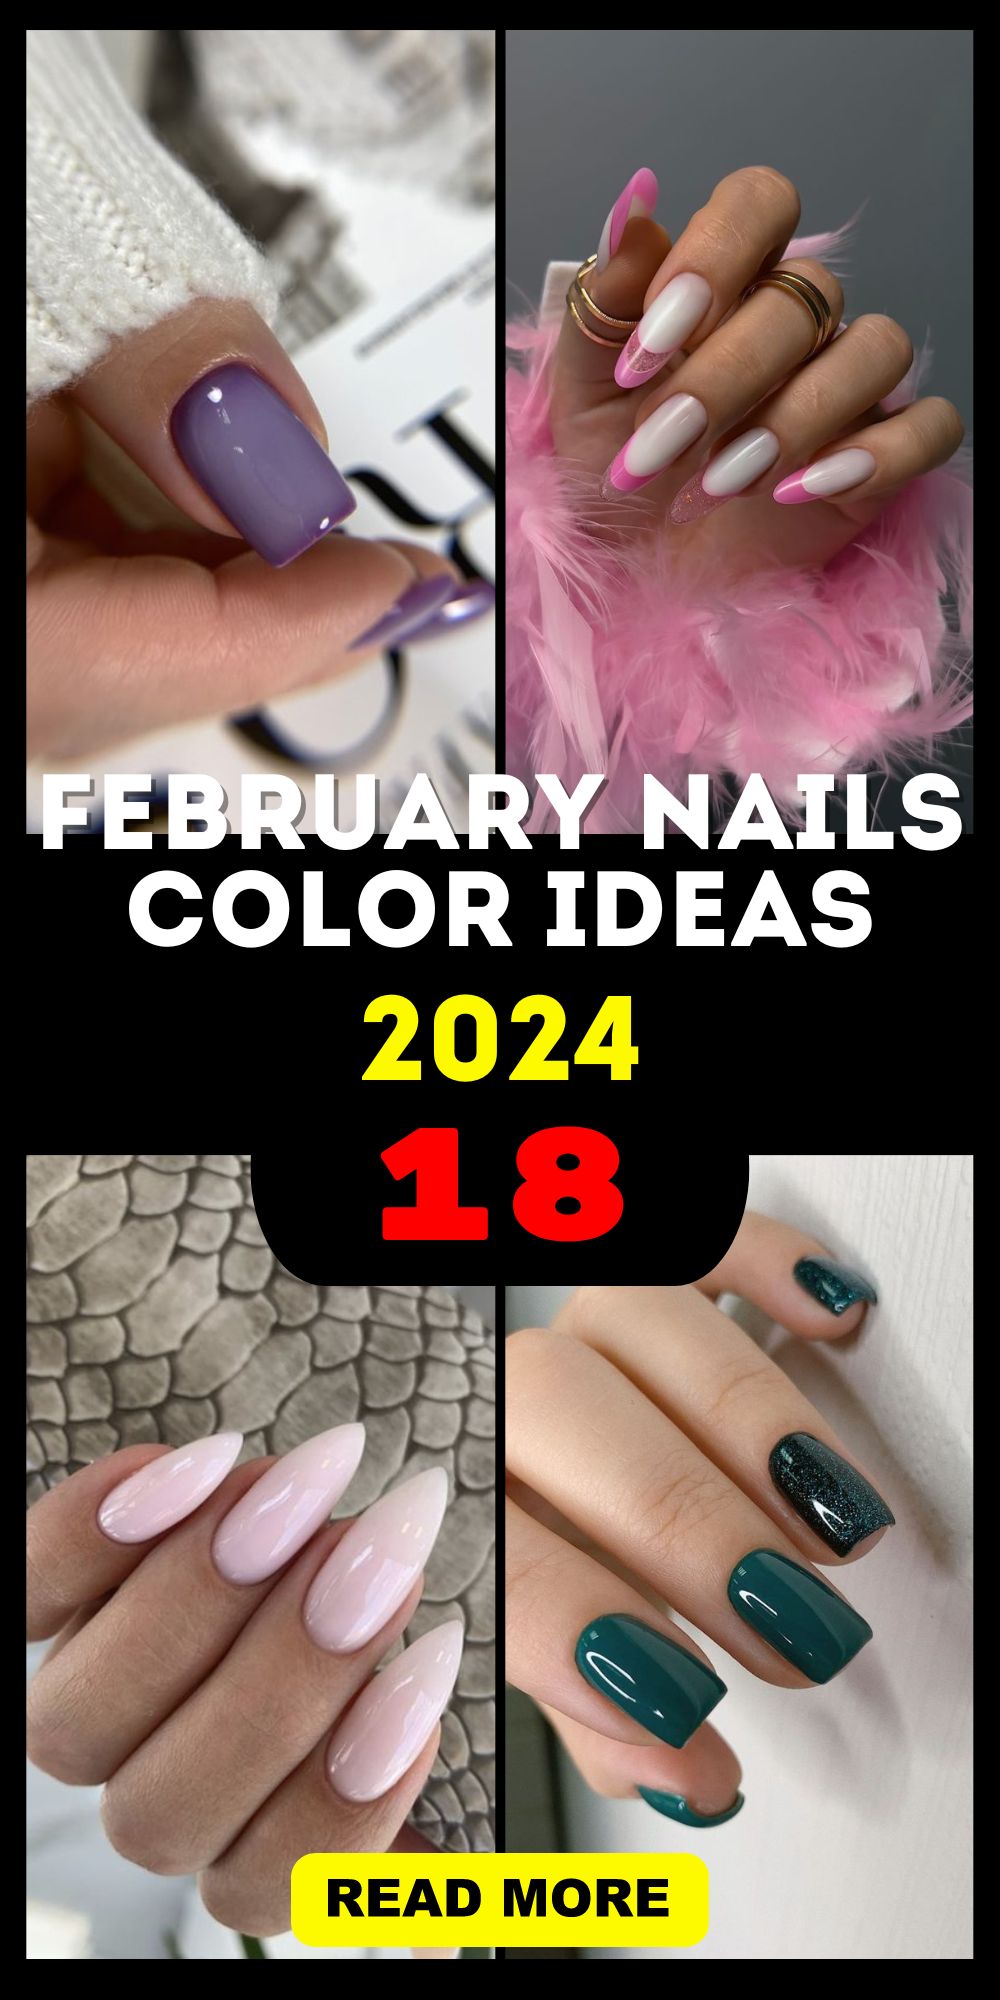 February Nails Color 2024: Find Your Valentine's Day & Everyday Style